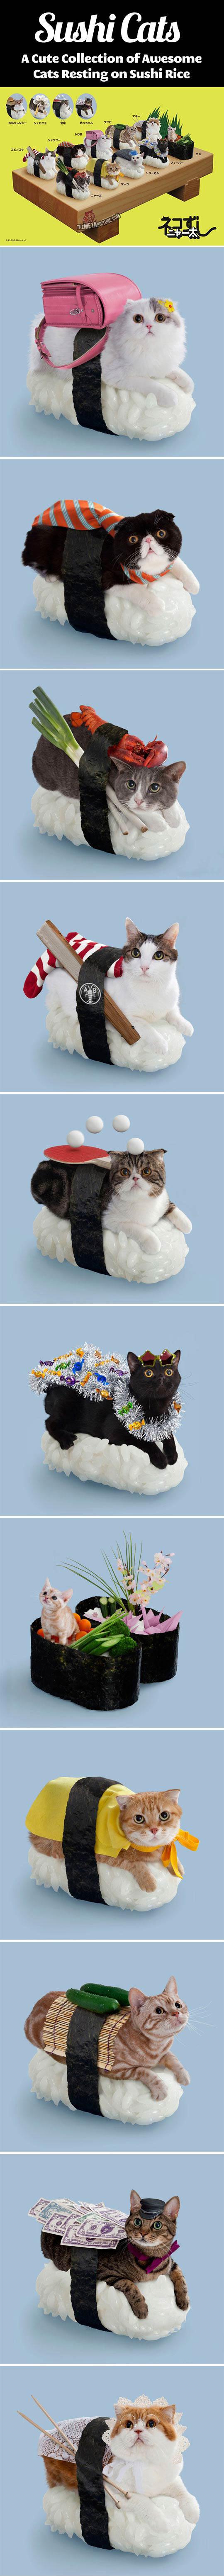 The Sushi Cats